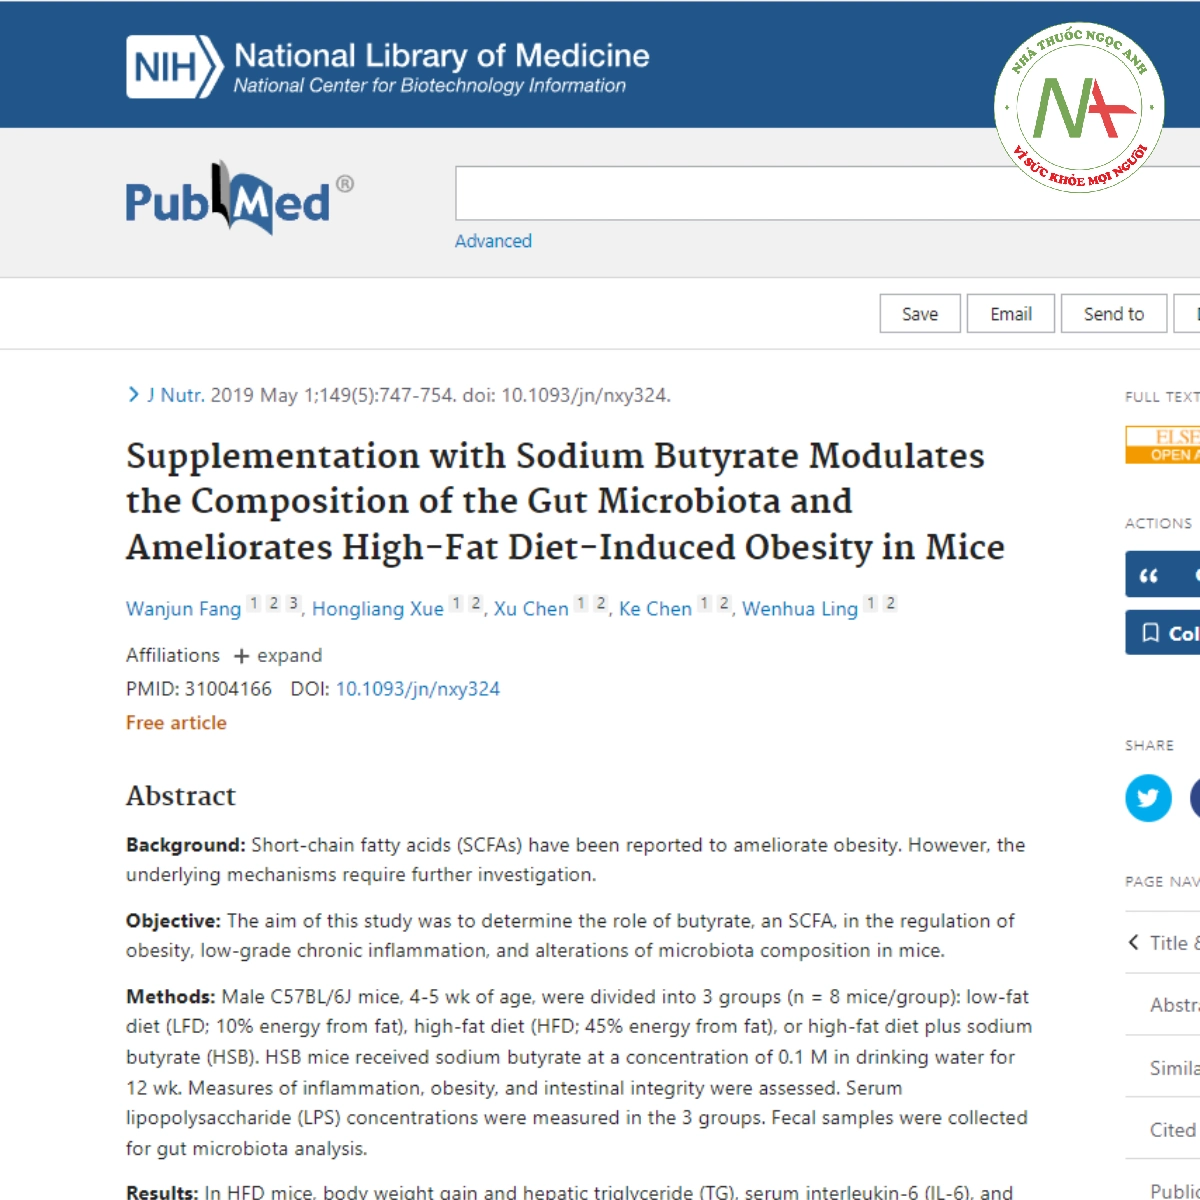 Supplementation with Sodium Butyrate Modulates the Composition of the Gut Microbiota and Ameliorates High-Fat Diet-Induced Obesity in Mice